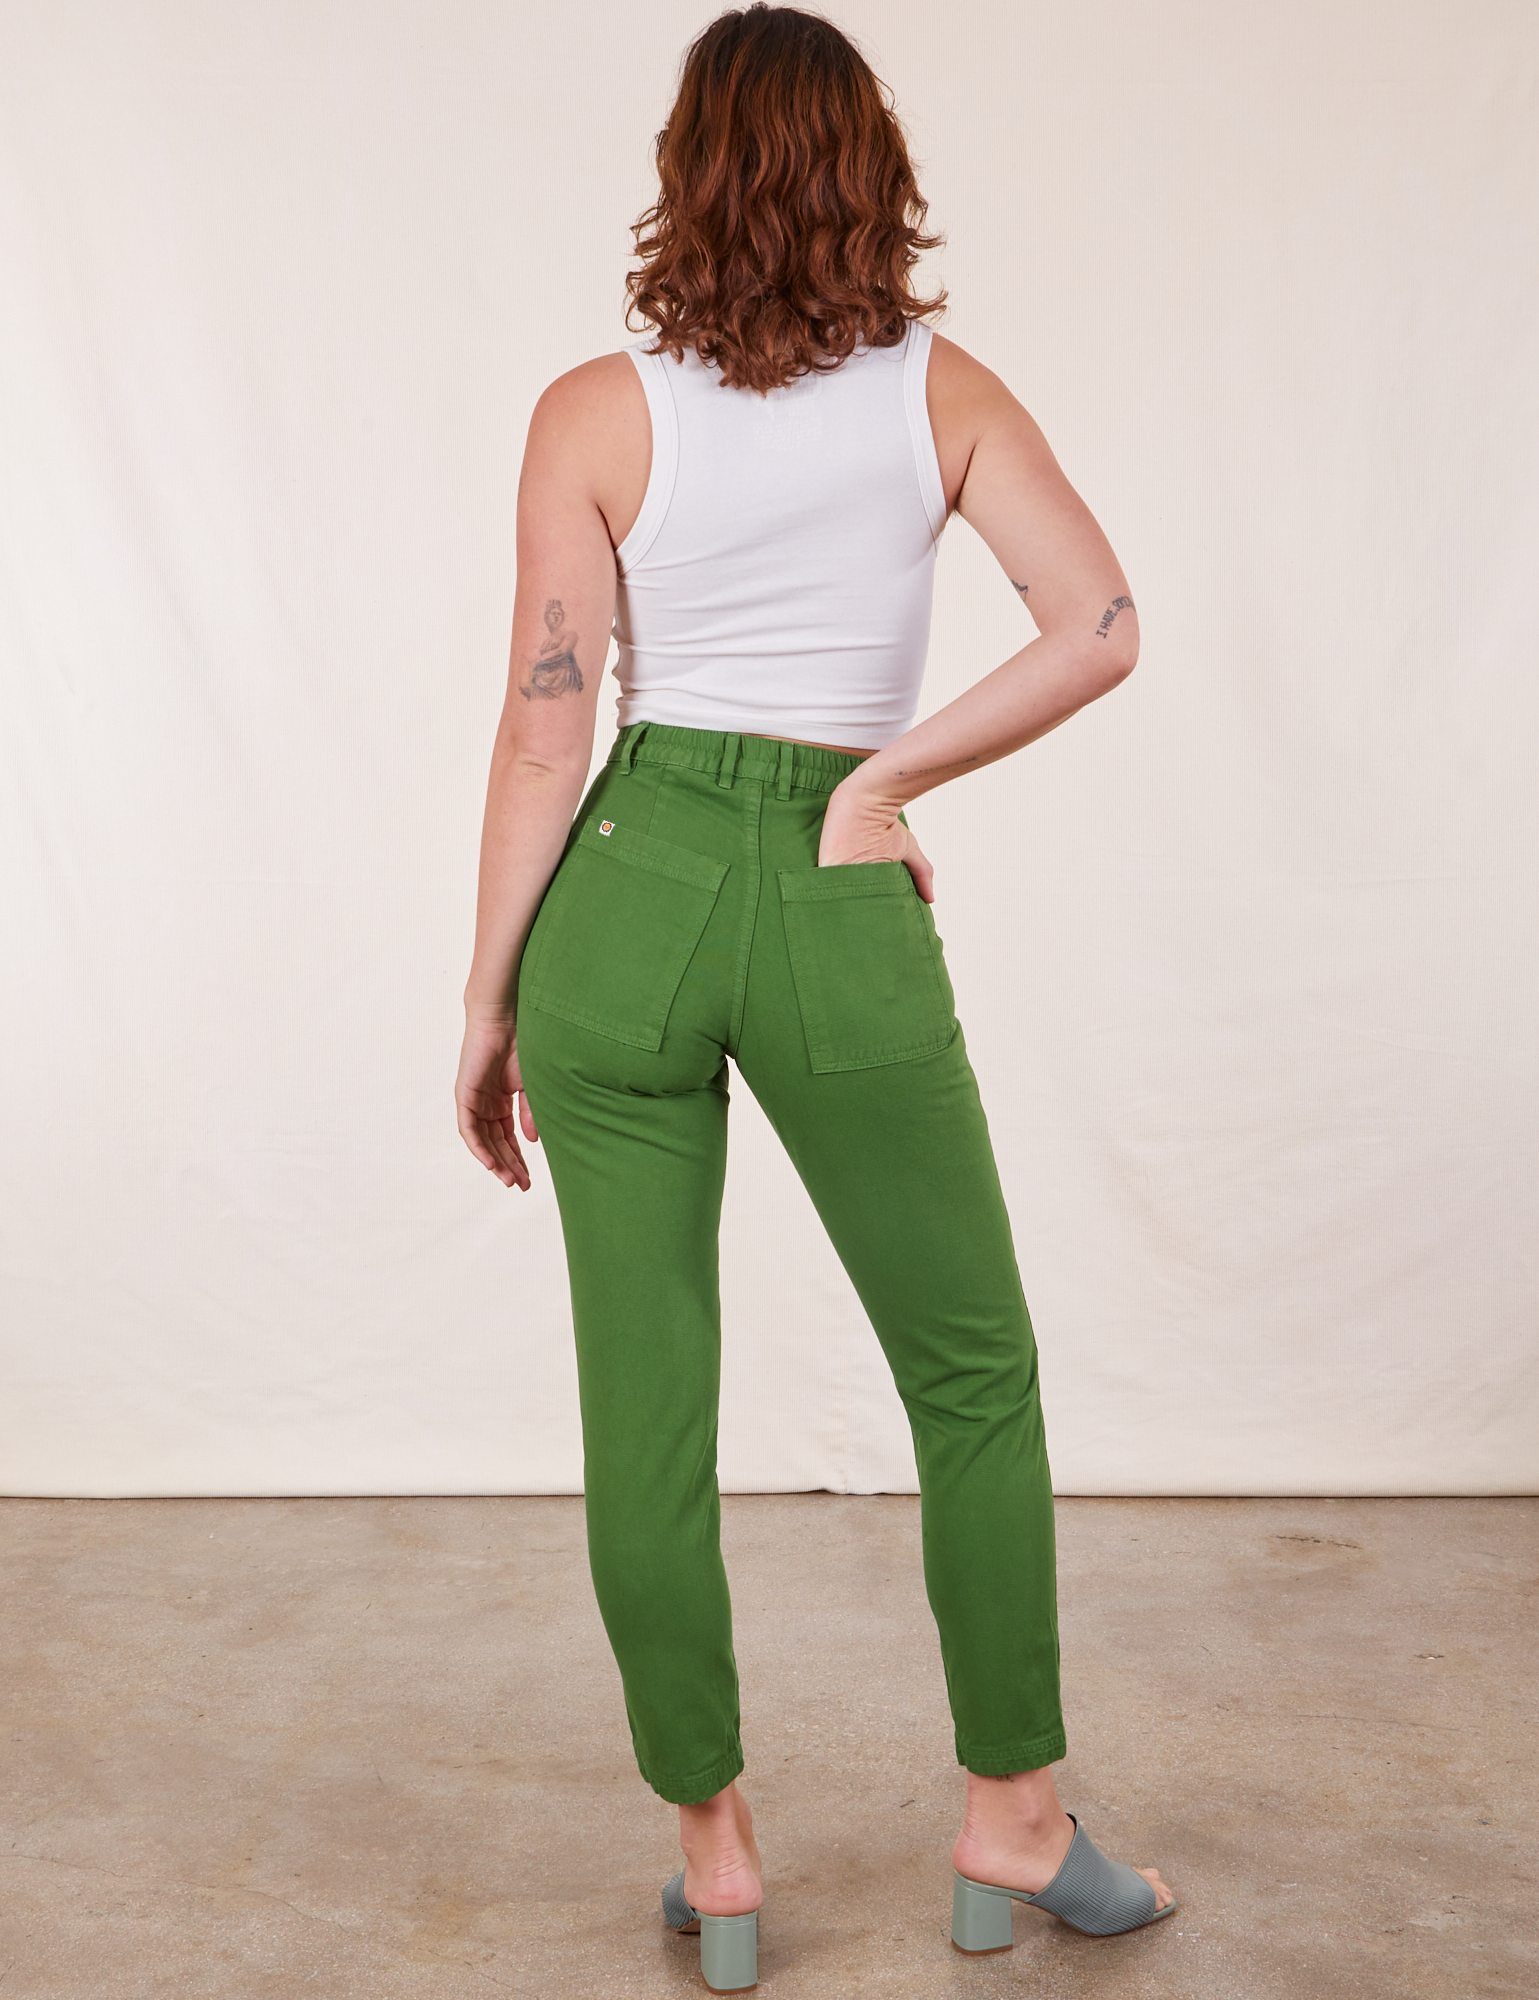 Back view of Pencil Pants in Lawn Green and vintage off-white Cropped Tank Top on Alex